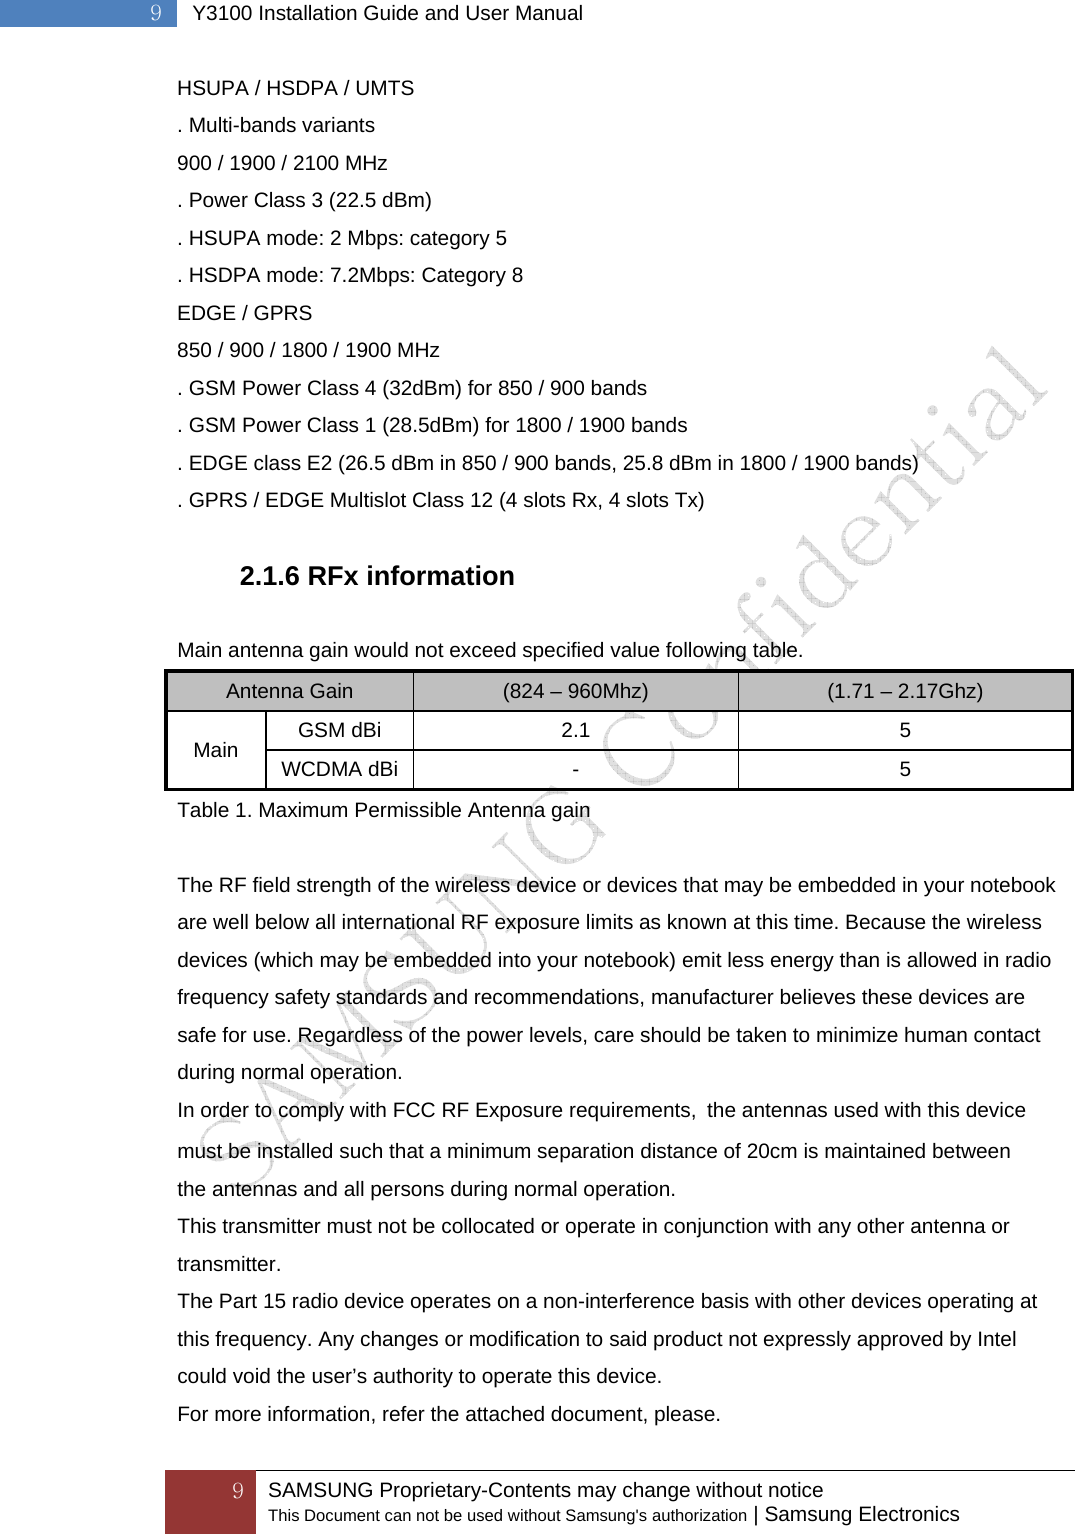  9 SAMSUNG Proprietary-Contents may change without notice This Document can not be used without Samsung&apos;s authorization | Samsung Electronics  9  Y3100 Installation Guide and User Manual HSUPA / HSDPA / UMTS . Multi-bands variants 900 / 1900 / 2100 MHz . Power Class 3 (22.5 dBm) . HSUPA mode: 2 Mbps: category 5 . HSDPA mode: 7.2Mbps: Category 8 EDGE / GPRS 850 / 900 / 1800 / 1900 MHz . GSM Power Class 4 (32dBm) for 850 / 900 bands . GSM Power Class 1 (28.5dBm) for 1800 / 1900 bands . EDGE class E2 (26.5 dBm in 850 / 900 bands, 25.8 dBm in 1800 / 1900 bands) . GPRS / EDGE Multislot Class 12 (4 slots Rx, 4 slots Tx)  2.1.6 RFx information  Main antenna gain would not exceed specified value following table. Antenna Gain  (824 – 960Mhz)  (1.71 – 2.17Ghz) Main  GSM dBi  2.1  5 WCDMA dBi  -  5 Table 1. Maximum Permissible Antenna gain  The RF field strength of the wireless device or devices that may be embedded in your notebook are well below all international RF exposure limits as known at this time. Because the wireless devices (which may be embedded into your notebook) emit less energy than is allowed in radio frequency safety standards and recommendations, manufacturer believes these devices are safe for use. Regardless of the power levels, care should be taken to minimize human contact during normal operation. In order to comply with FCC RF Exposure requirements,  the antennas used with this devicemust be installed such that a minimum separation distance of 20cm is maintained between the antennas and all persons during normal operation. This transmitter must not be collocated or operate in conjunction with any other antenna or transmitter. The Part 15 radio device operates on a non-interference basis with other devices operating at this frequency. Any changes or modification to said product not expressly approved by Intel could void the user’s authority to operate this device. For more information, refer the attached document, please. 